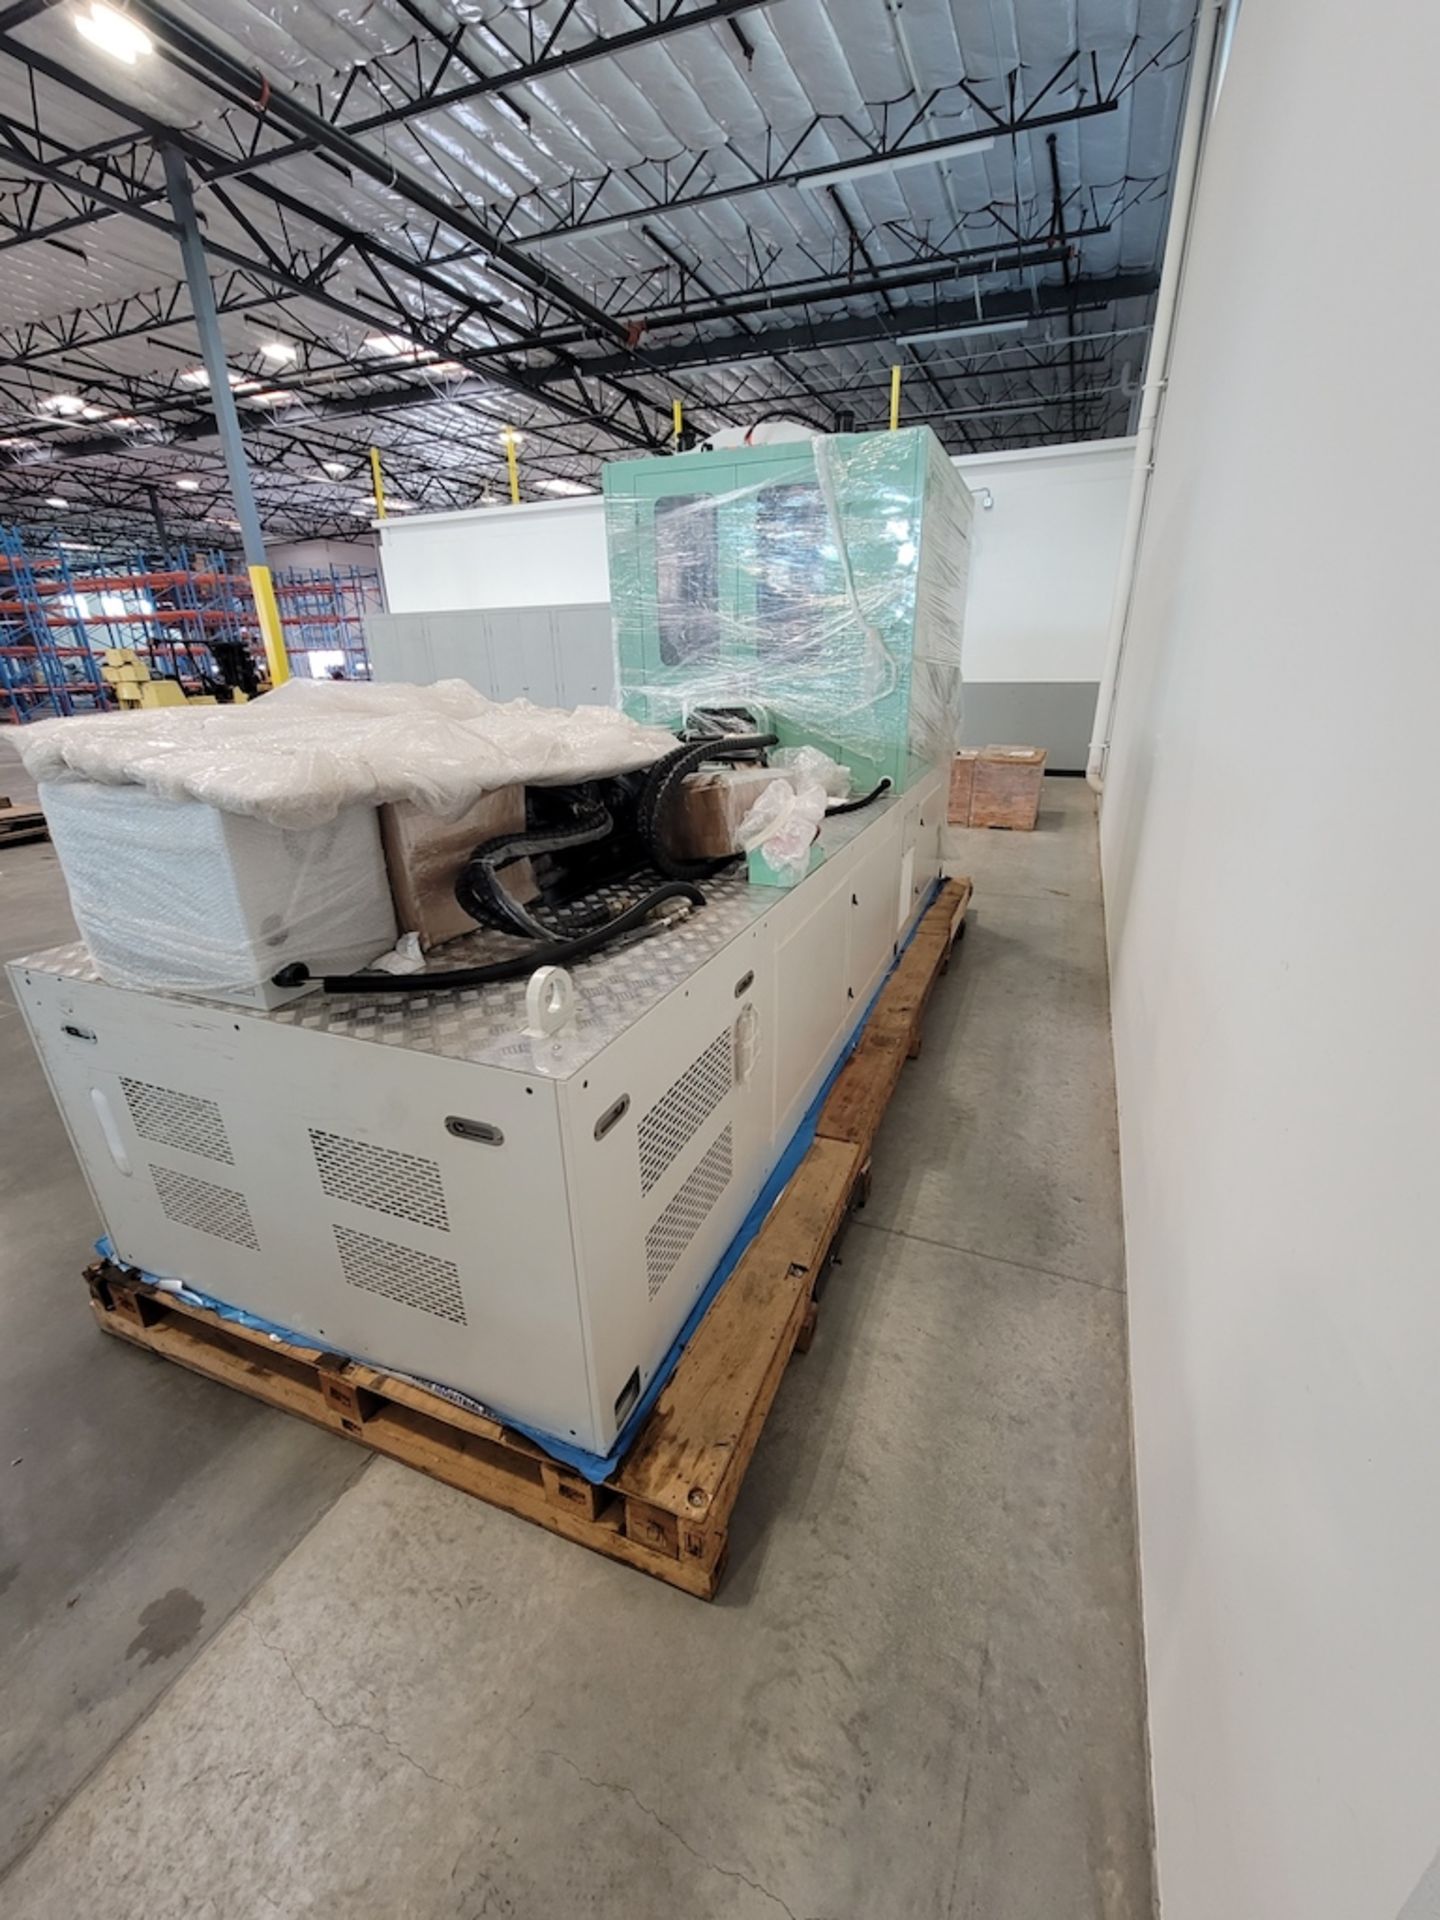 Midas Altatech MA-100-FSIII Injection Stretch Blow Molder, New in 2020 (NEVER IN SERVICE) - Image 3 of 10